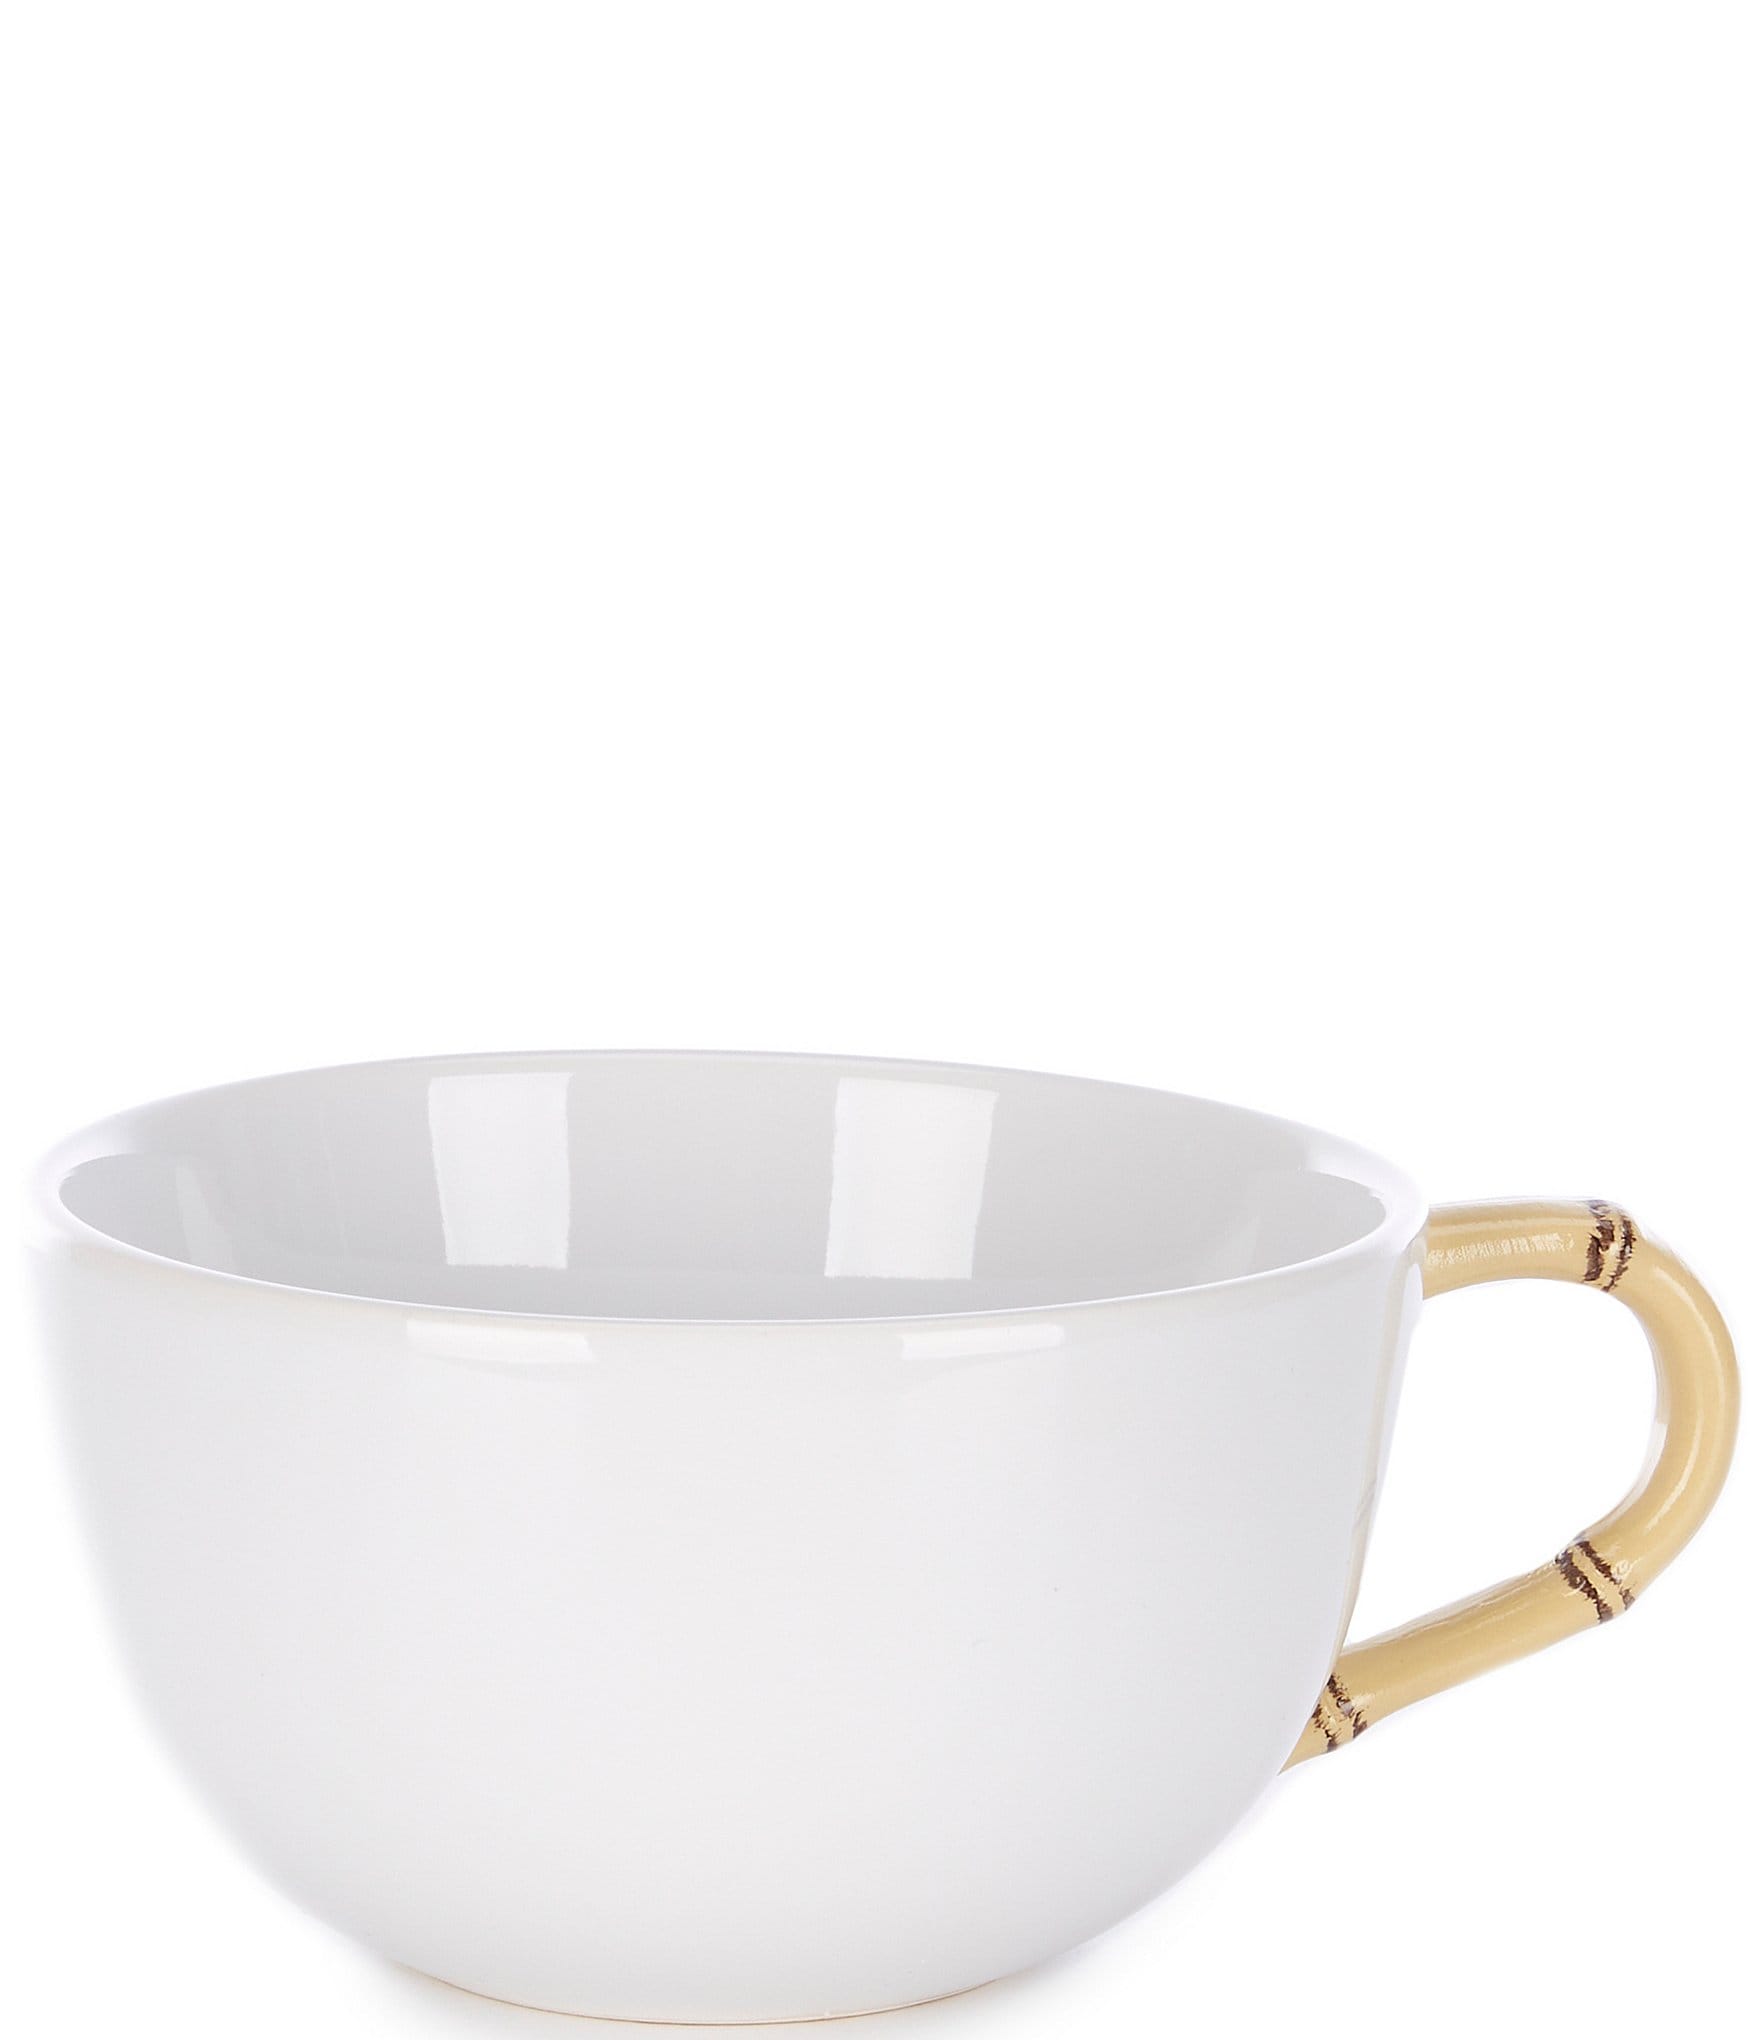 Southern Living Astra Collection Glazed Belly Coffee Mugs, Set of 2